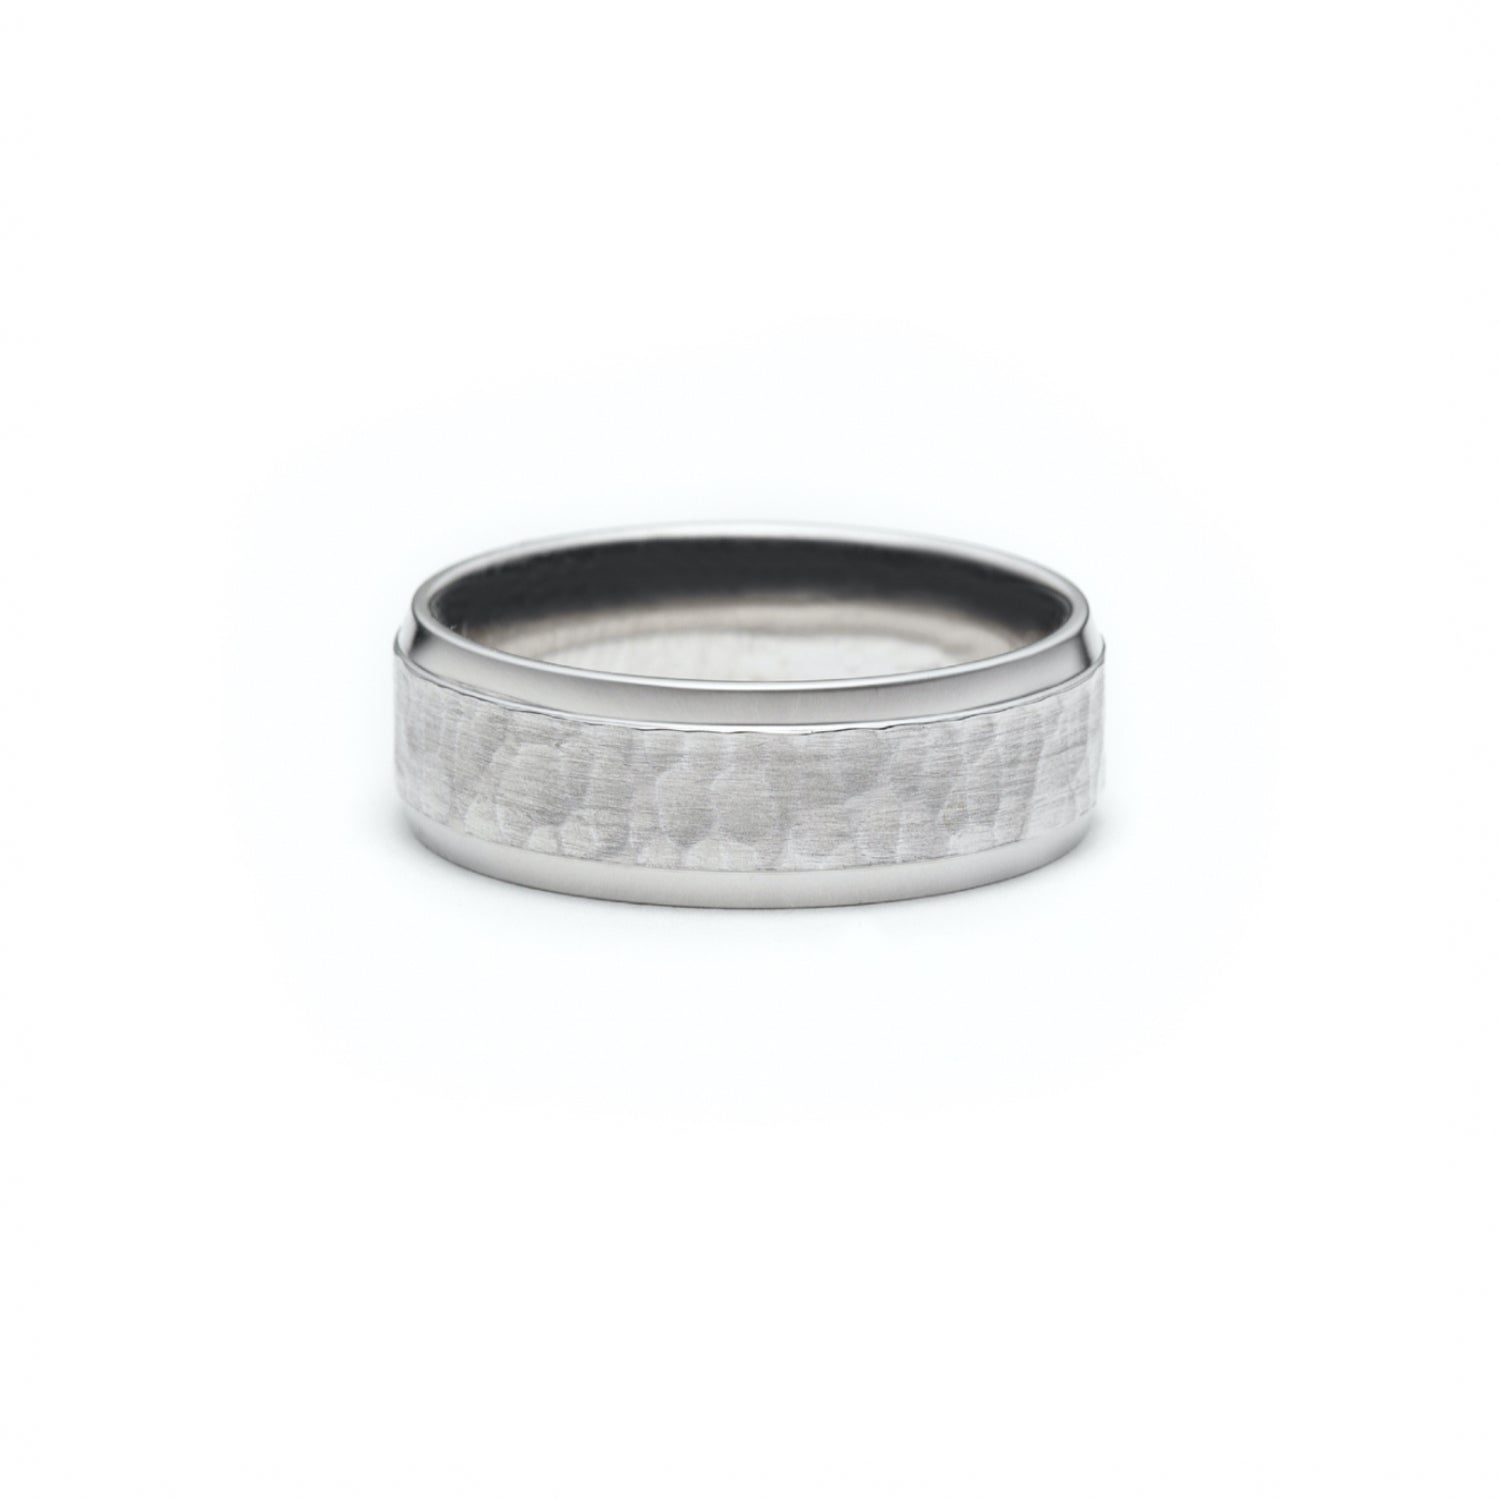 Hammered Finish Bevelled Edge 8-9 mm Wedding Band in White Gold